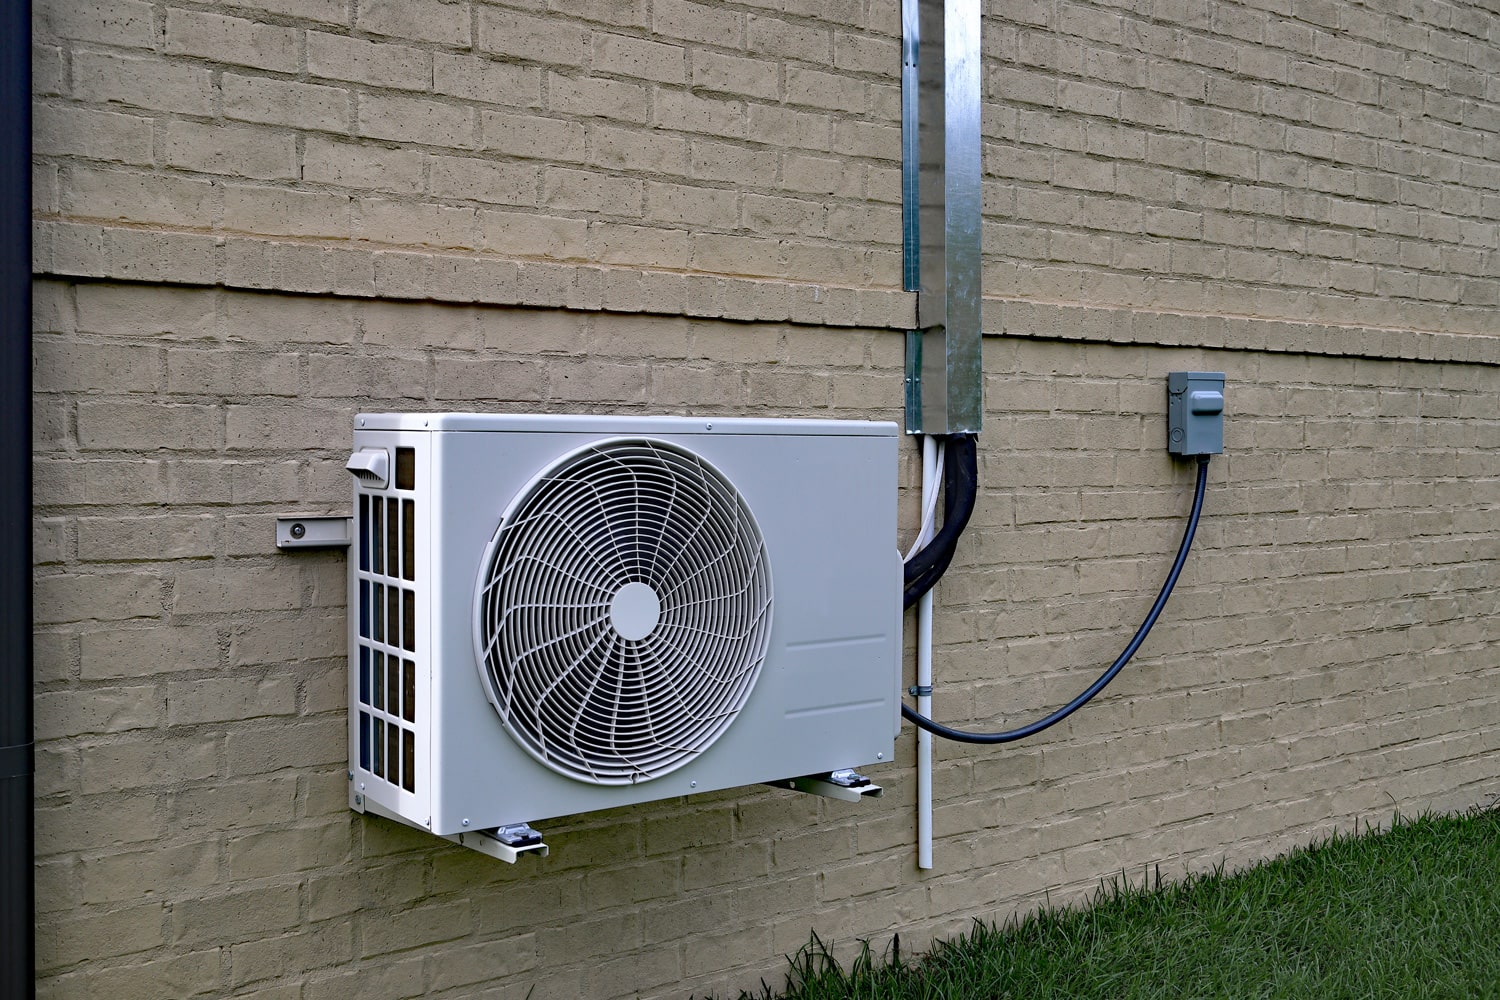 Air Conditioner mini split system mounted on brick wall